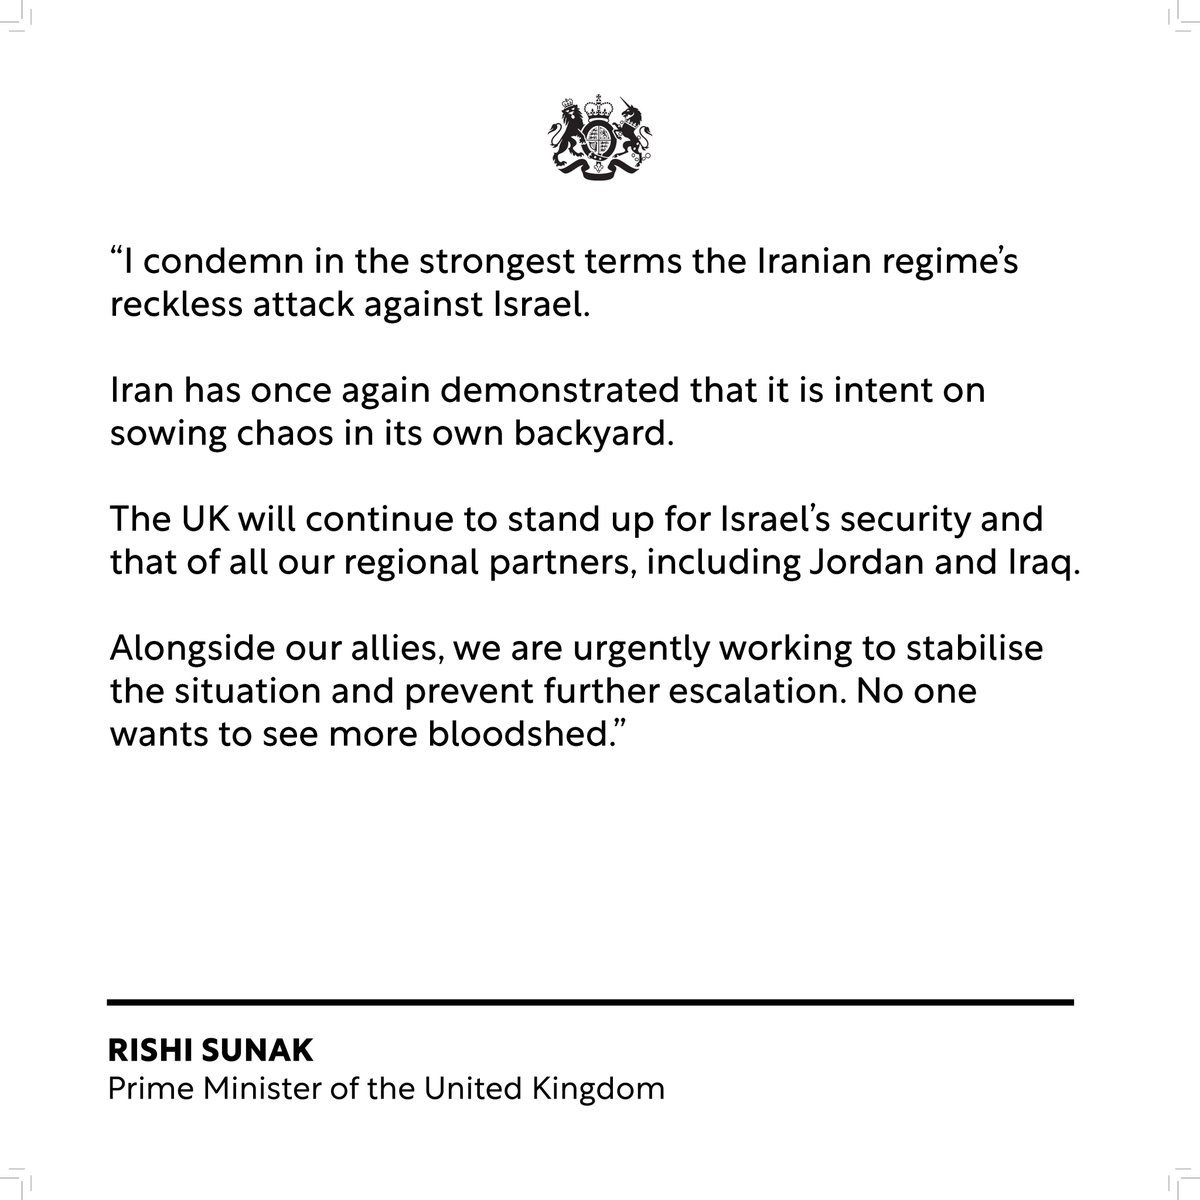 Statement from UK prime minister Sunak: I condemn in the strongest terms the Iranian government's reckless attack against Israel